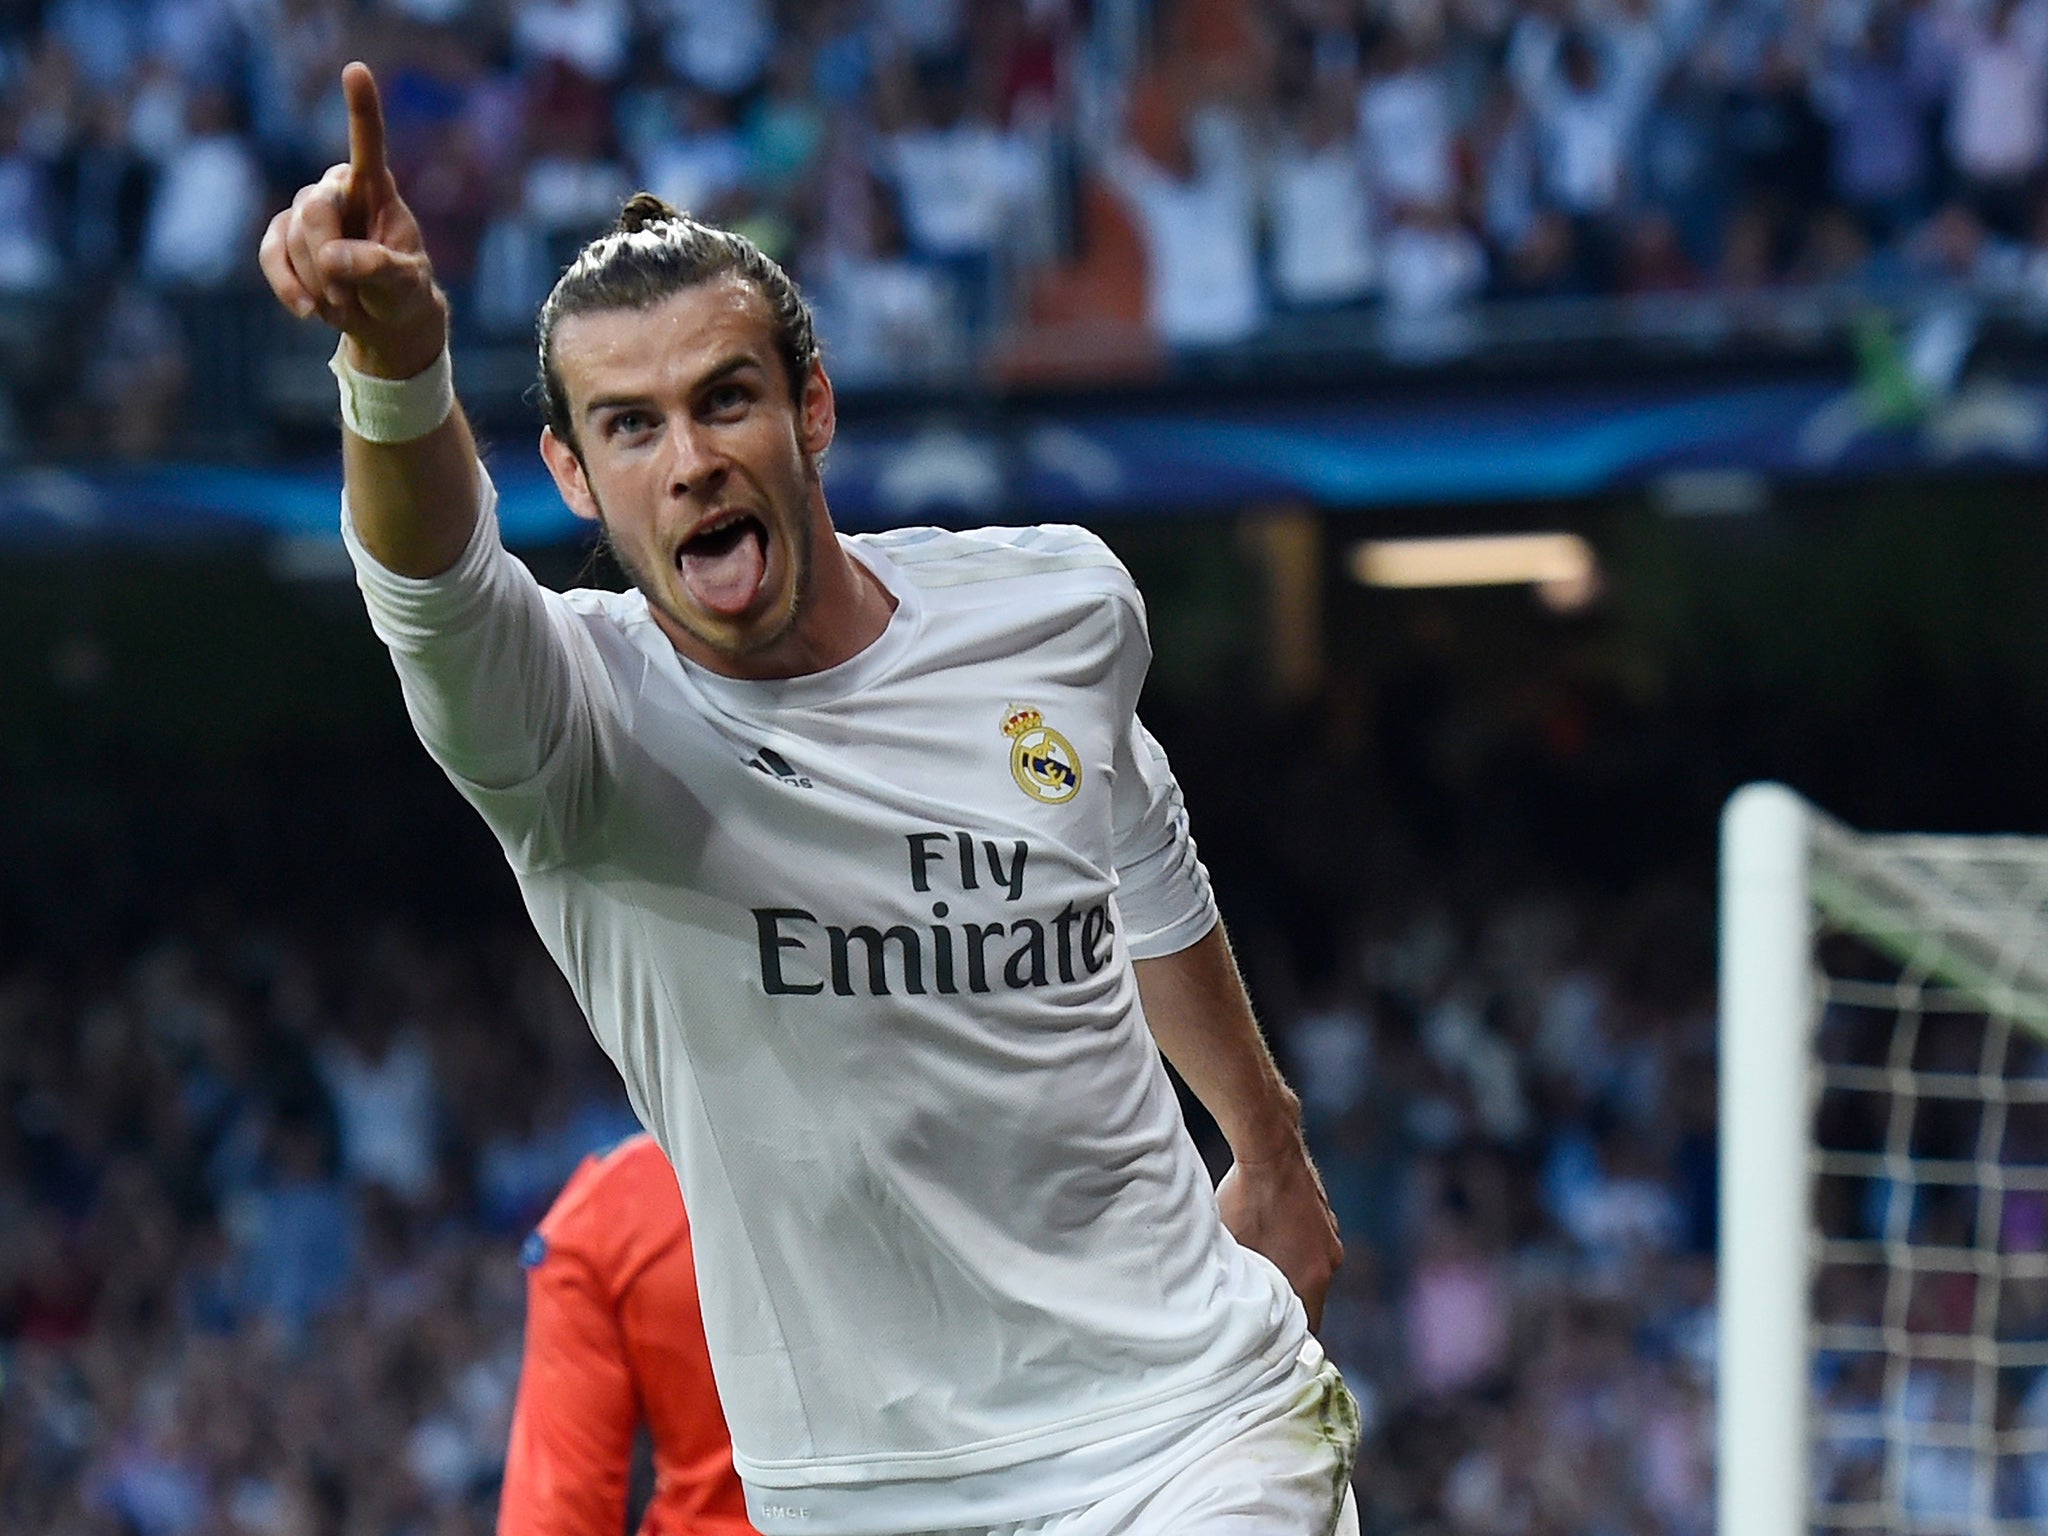 Gareth Bale was the inspiration behind Real Madrid's semi-final victory over Manchester City